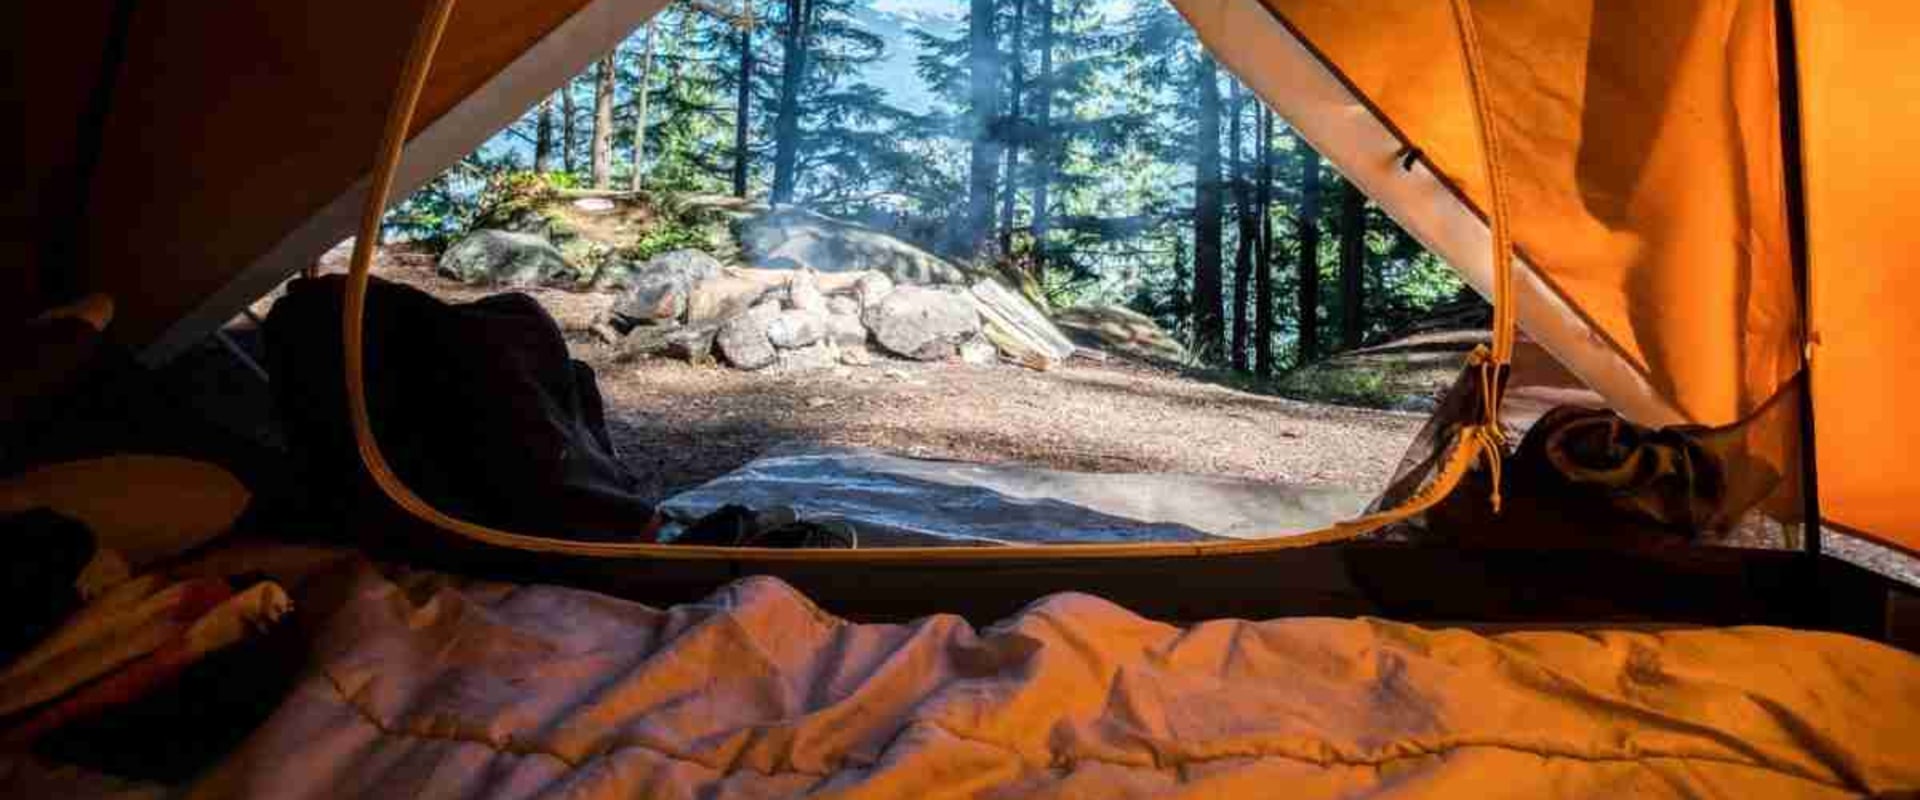 Outdoor Recreation: Staying Safe While Camping